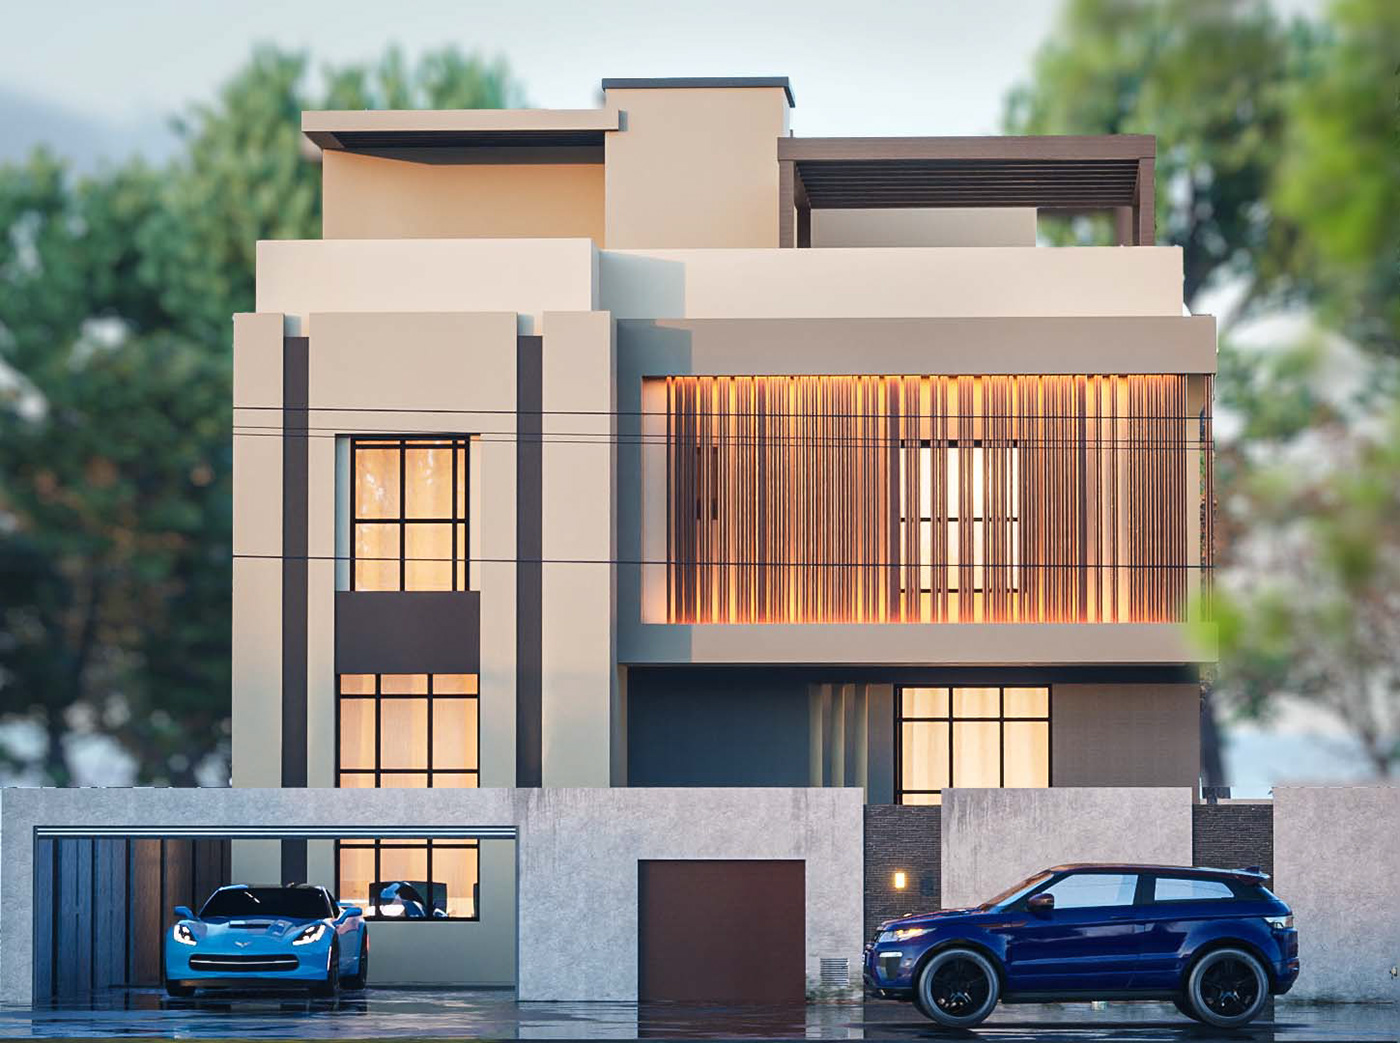 architecture 3ds max Render exterior modern corona vray